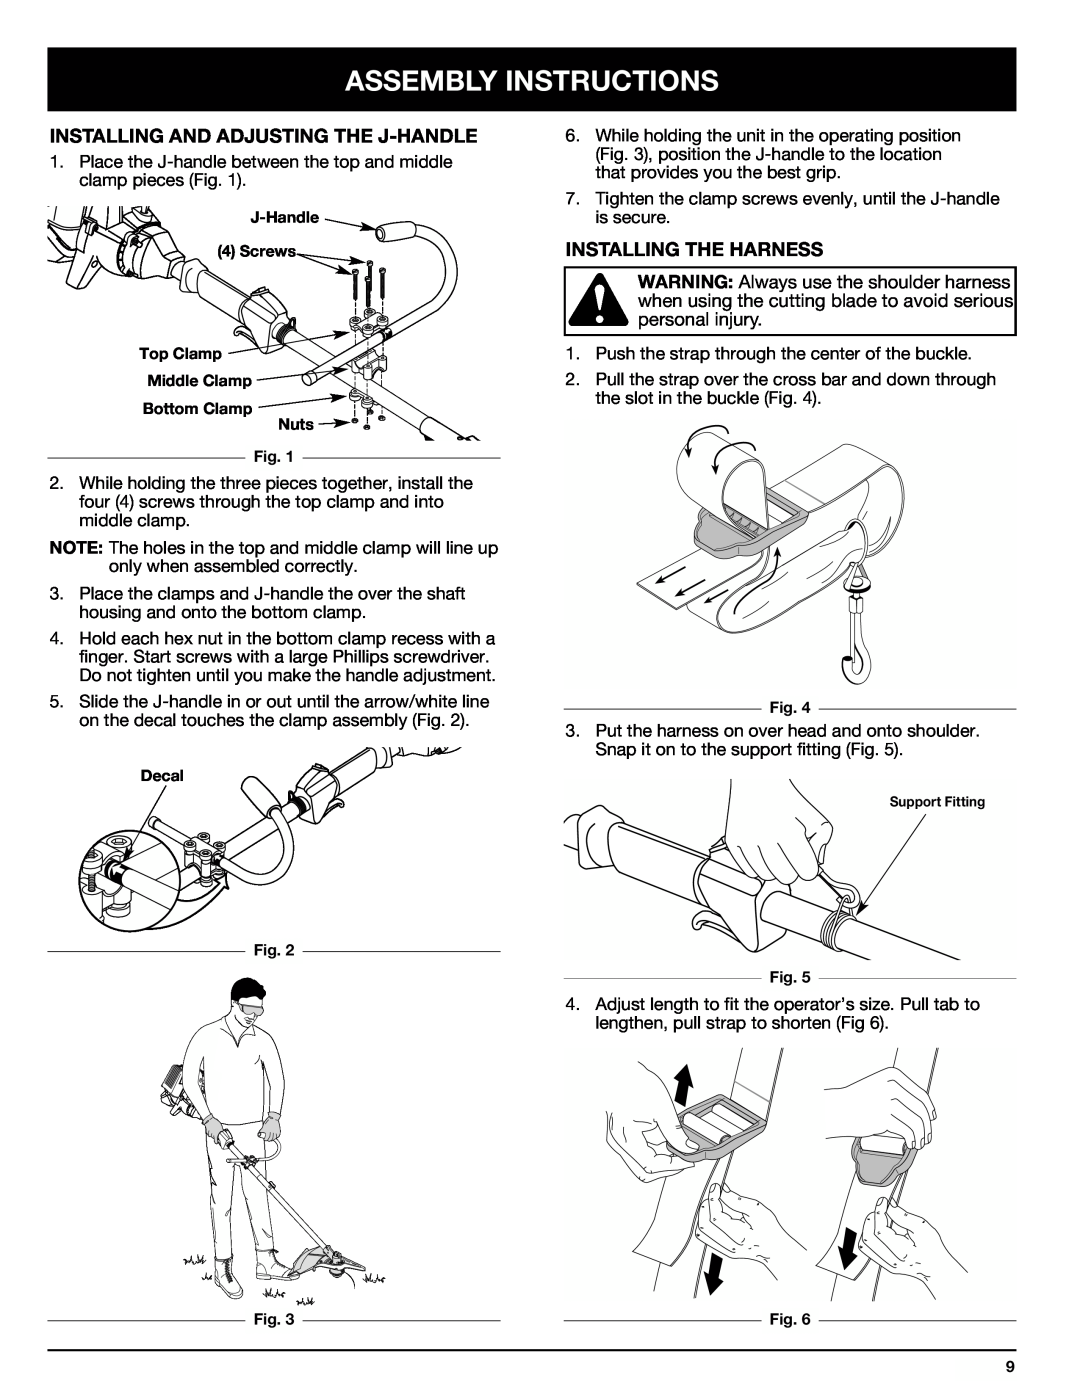 Ryobi 890r manual Assembly Instructions, Installing And Adjusting The J-Handle, Installing The Harness 